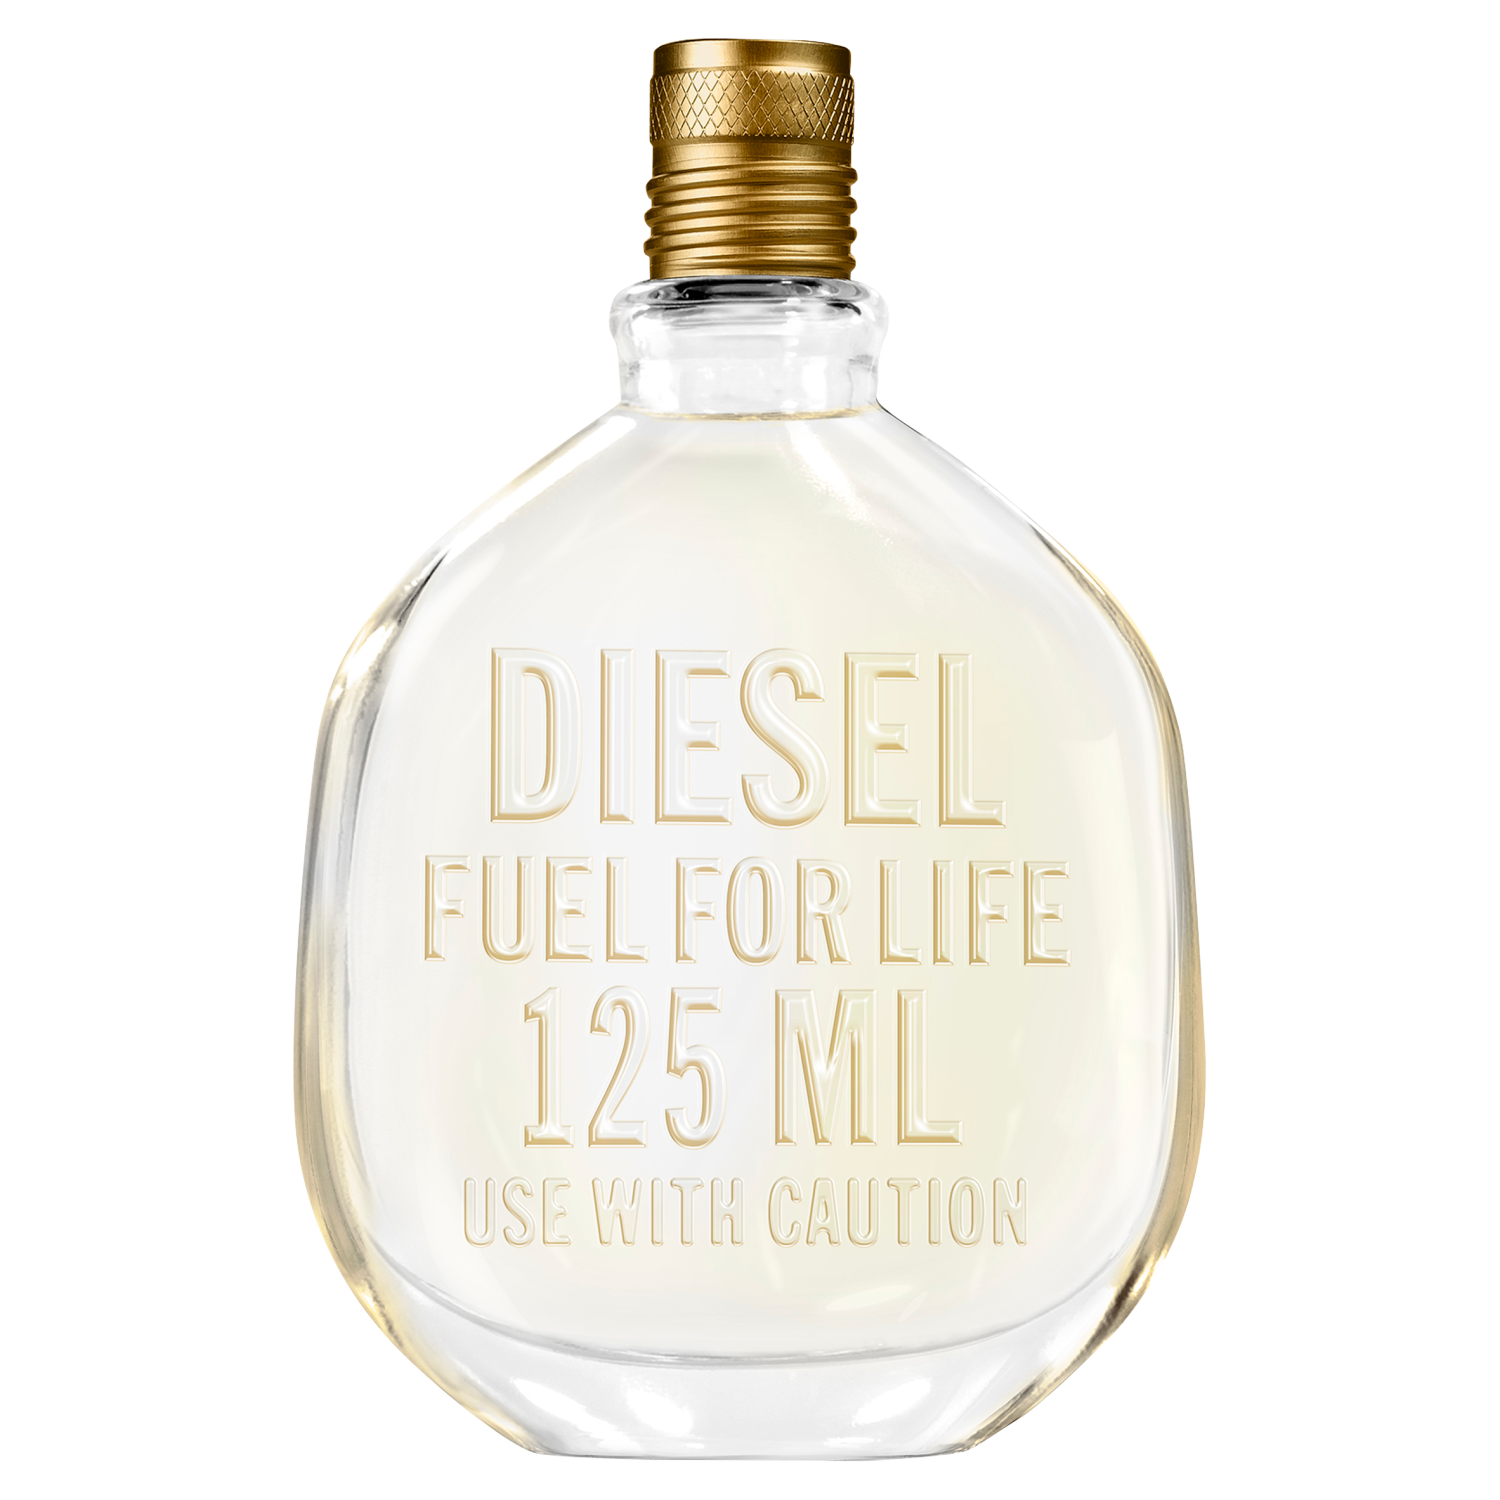 Мужская туалетная вода Diesel Fuel For Life Homme, 125 мл dn0sd253 dn0sdn187 dn0sd187 dn0sdn177 dn0sdn224 dn0sdn240 dnosd304 dn0sd248 dn0sd126 dn10sd242 diesel fuel injection nozzle